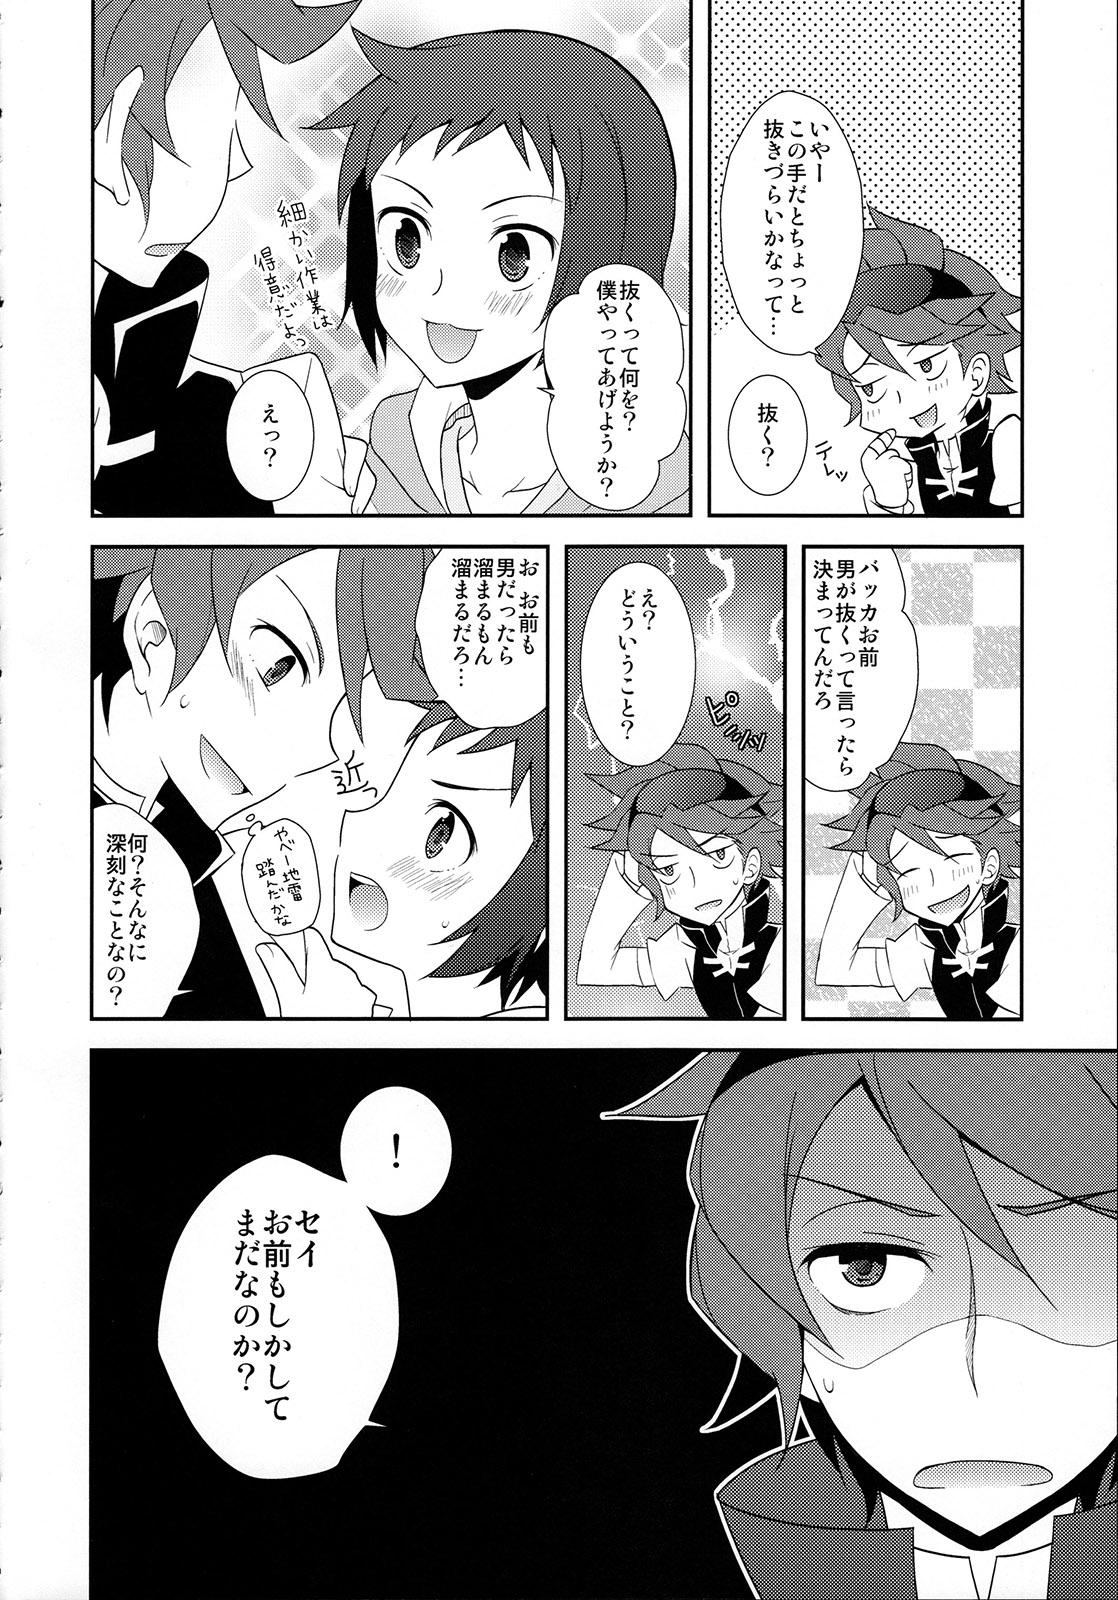 Sexo Anal Maybe★Friendship - Gundam build fighters Dirty Talk - Page 5